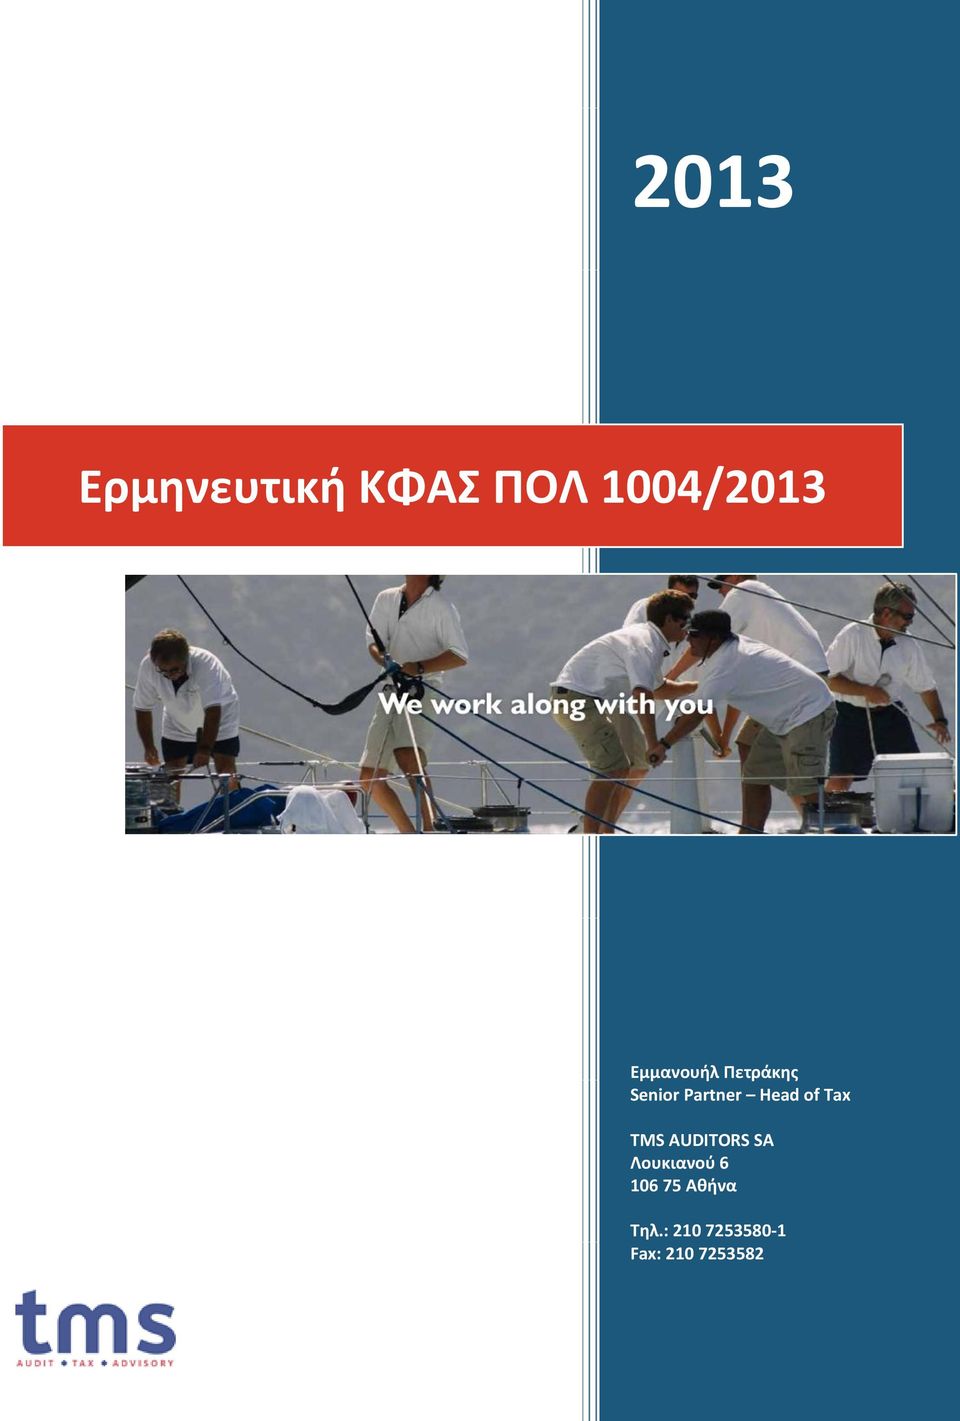 of Tax TMS AUDITORS SA Λουκιανού 6 106